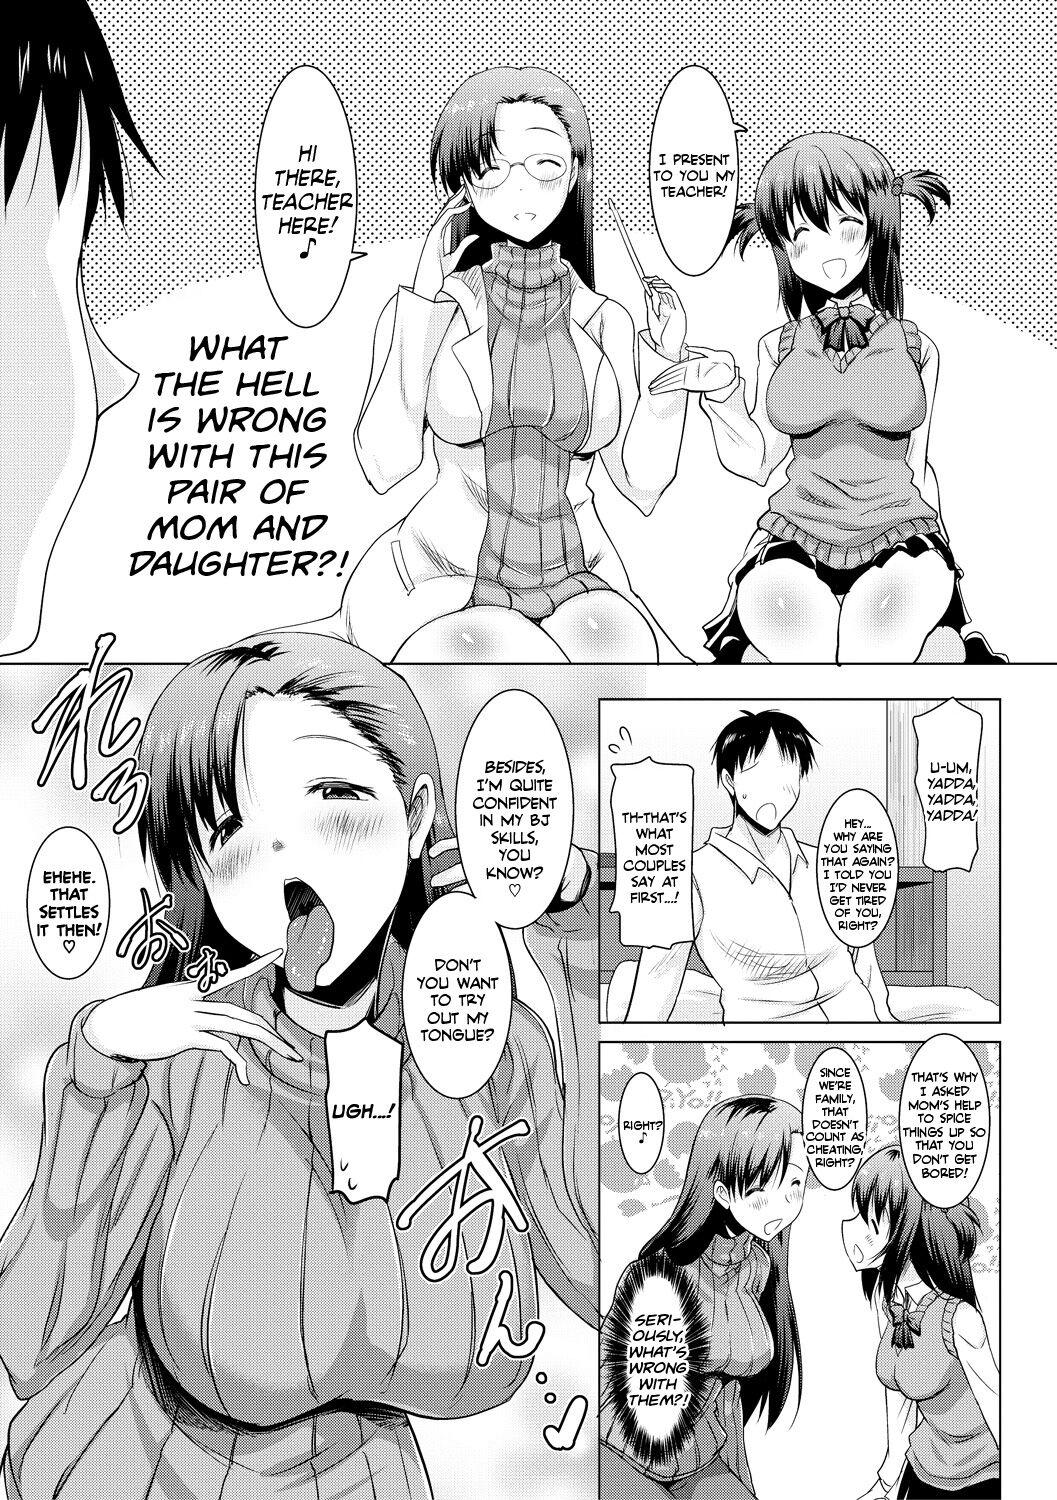 [Pony-R] I Can't Live Without My Little Sister's Tongue Chapter 01-02 + Secret Baby-making Sex with a Big-titted Mother and Daughter! (Kyonyuu Oyako no Shita to Shikyuu ni Renzoku Shasei) [English] [Team Rabu2] [Digital] 47